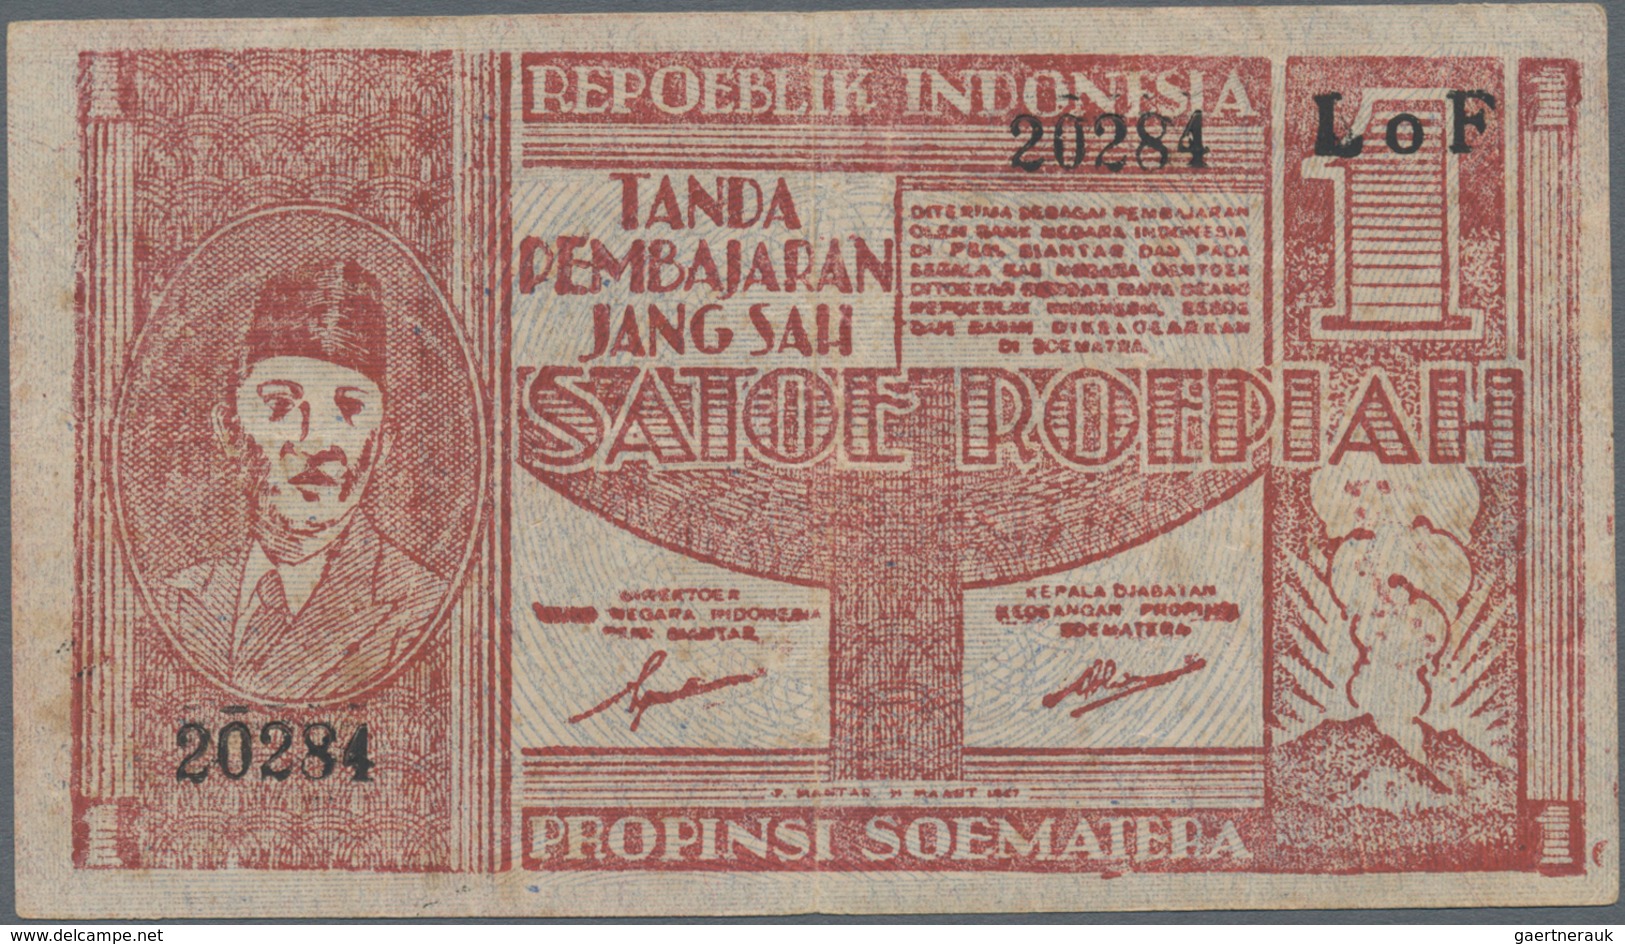 Indonesia / Indonesien: Set with 8 banknotes of the local & rebellious issues of the 1940's with 50